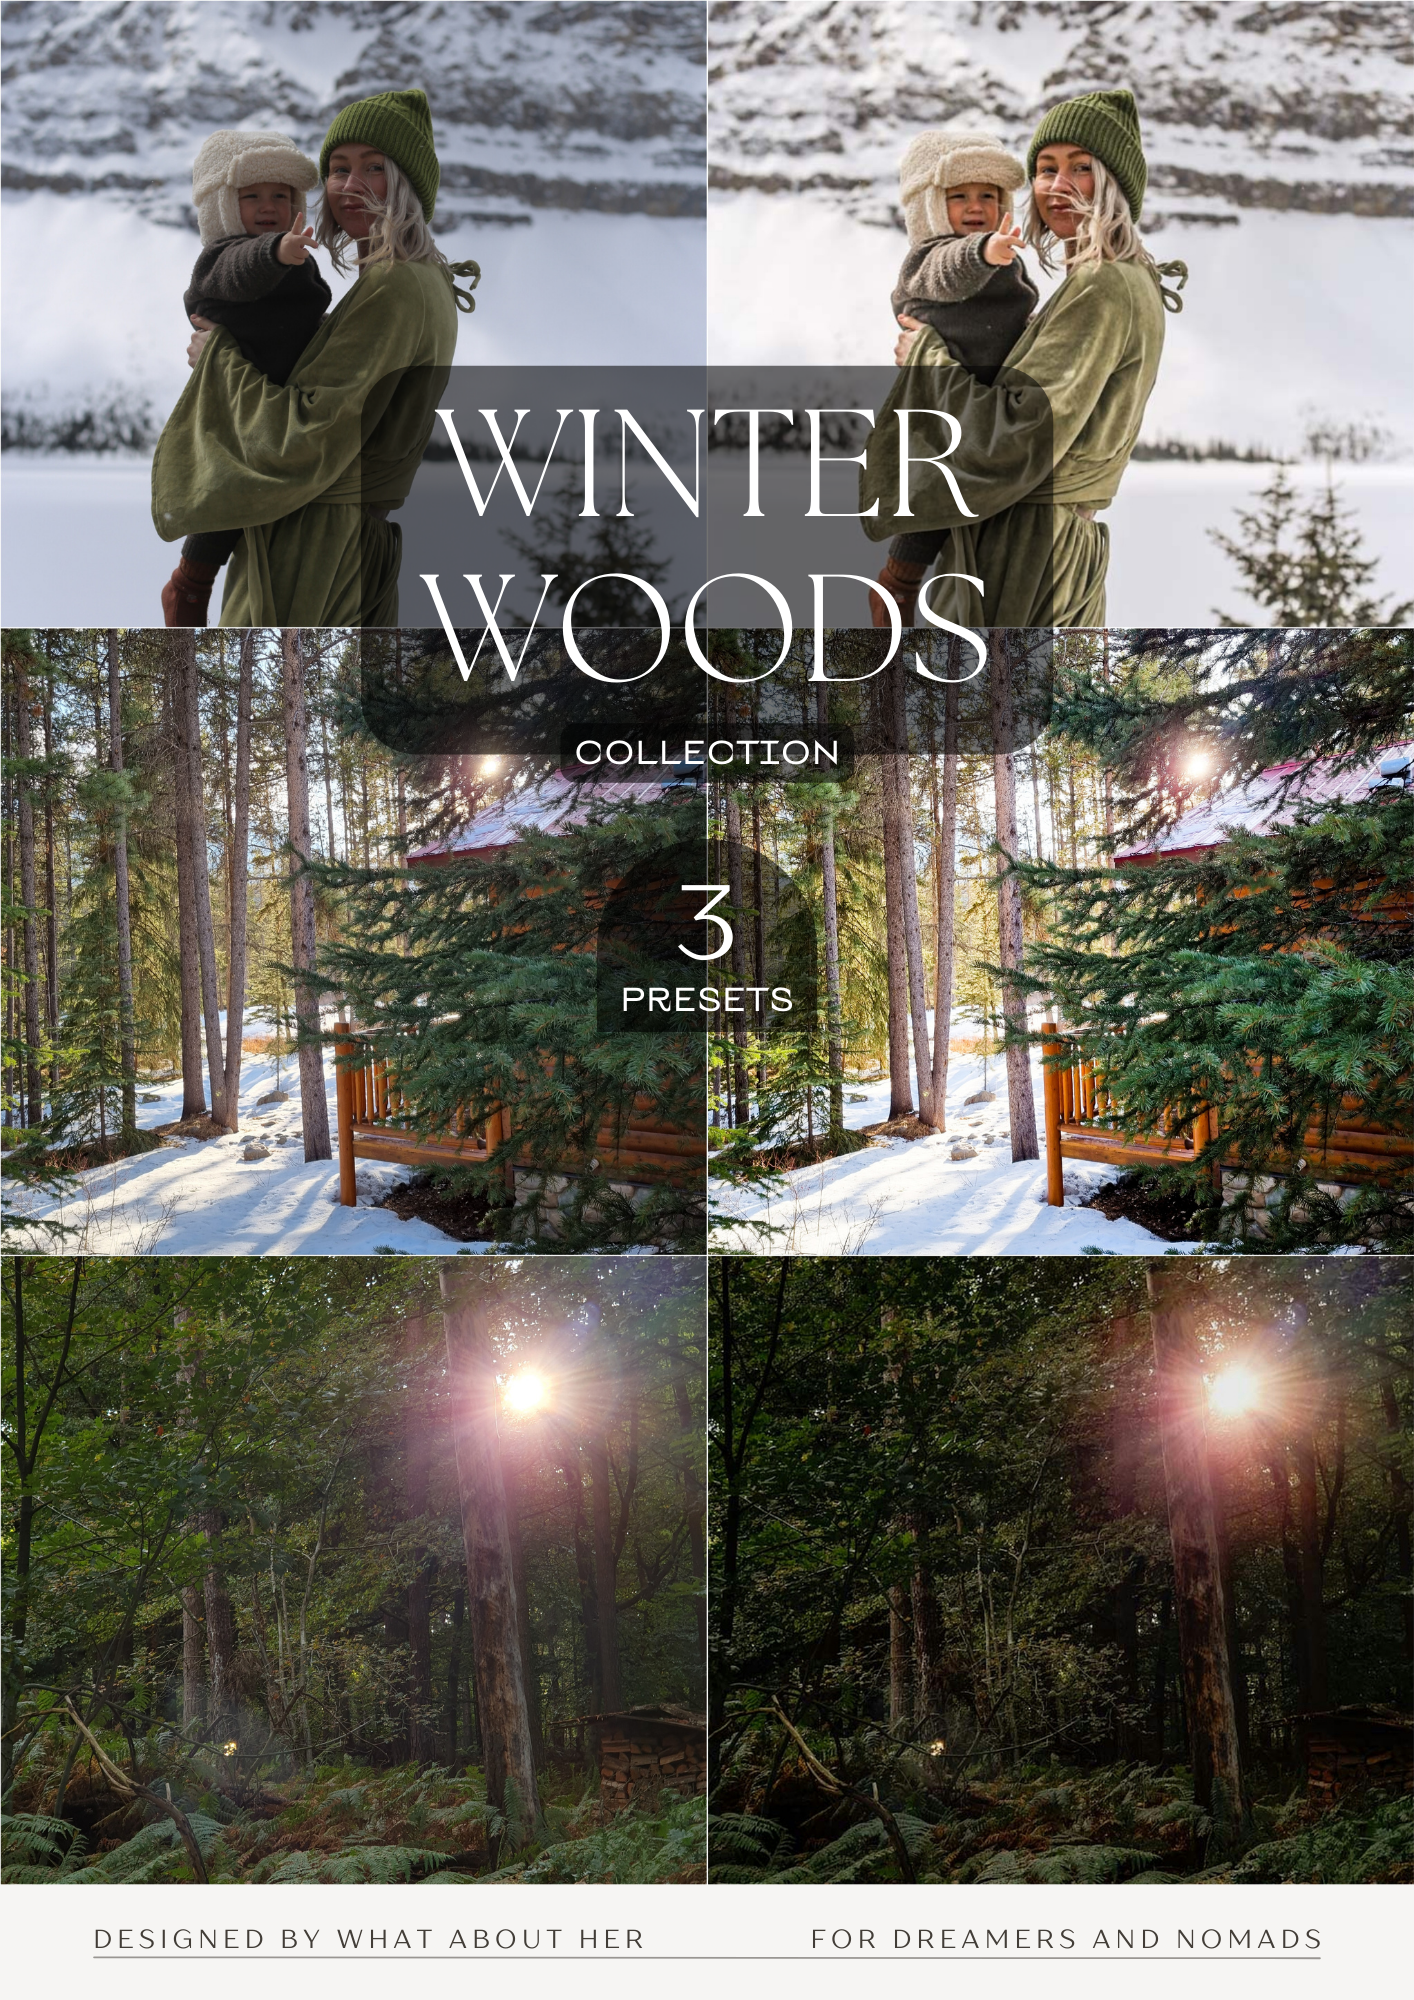 PRESETS | WINTER WOODS COLLECTION